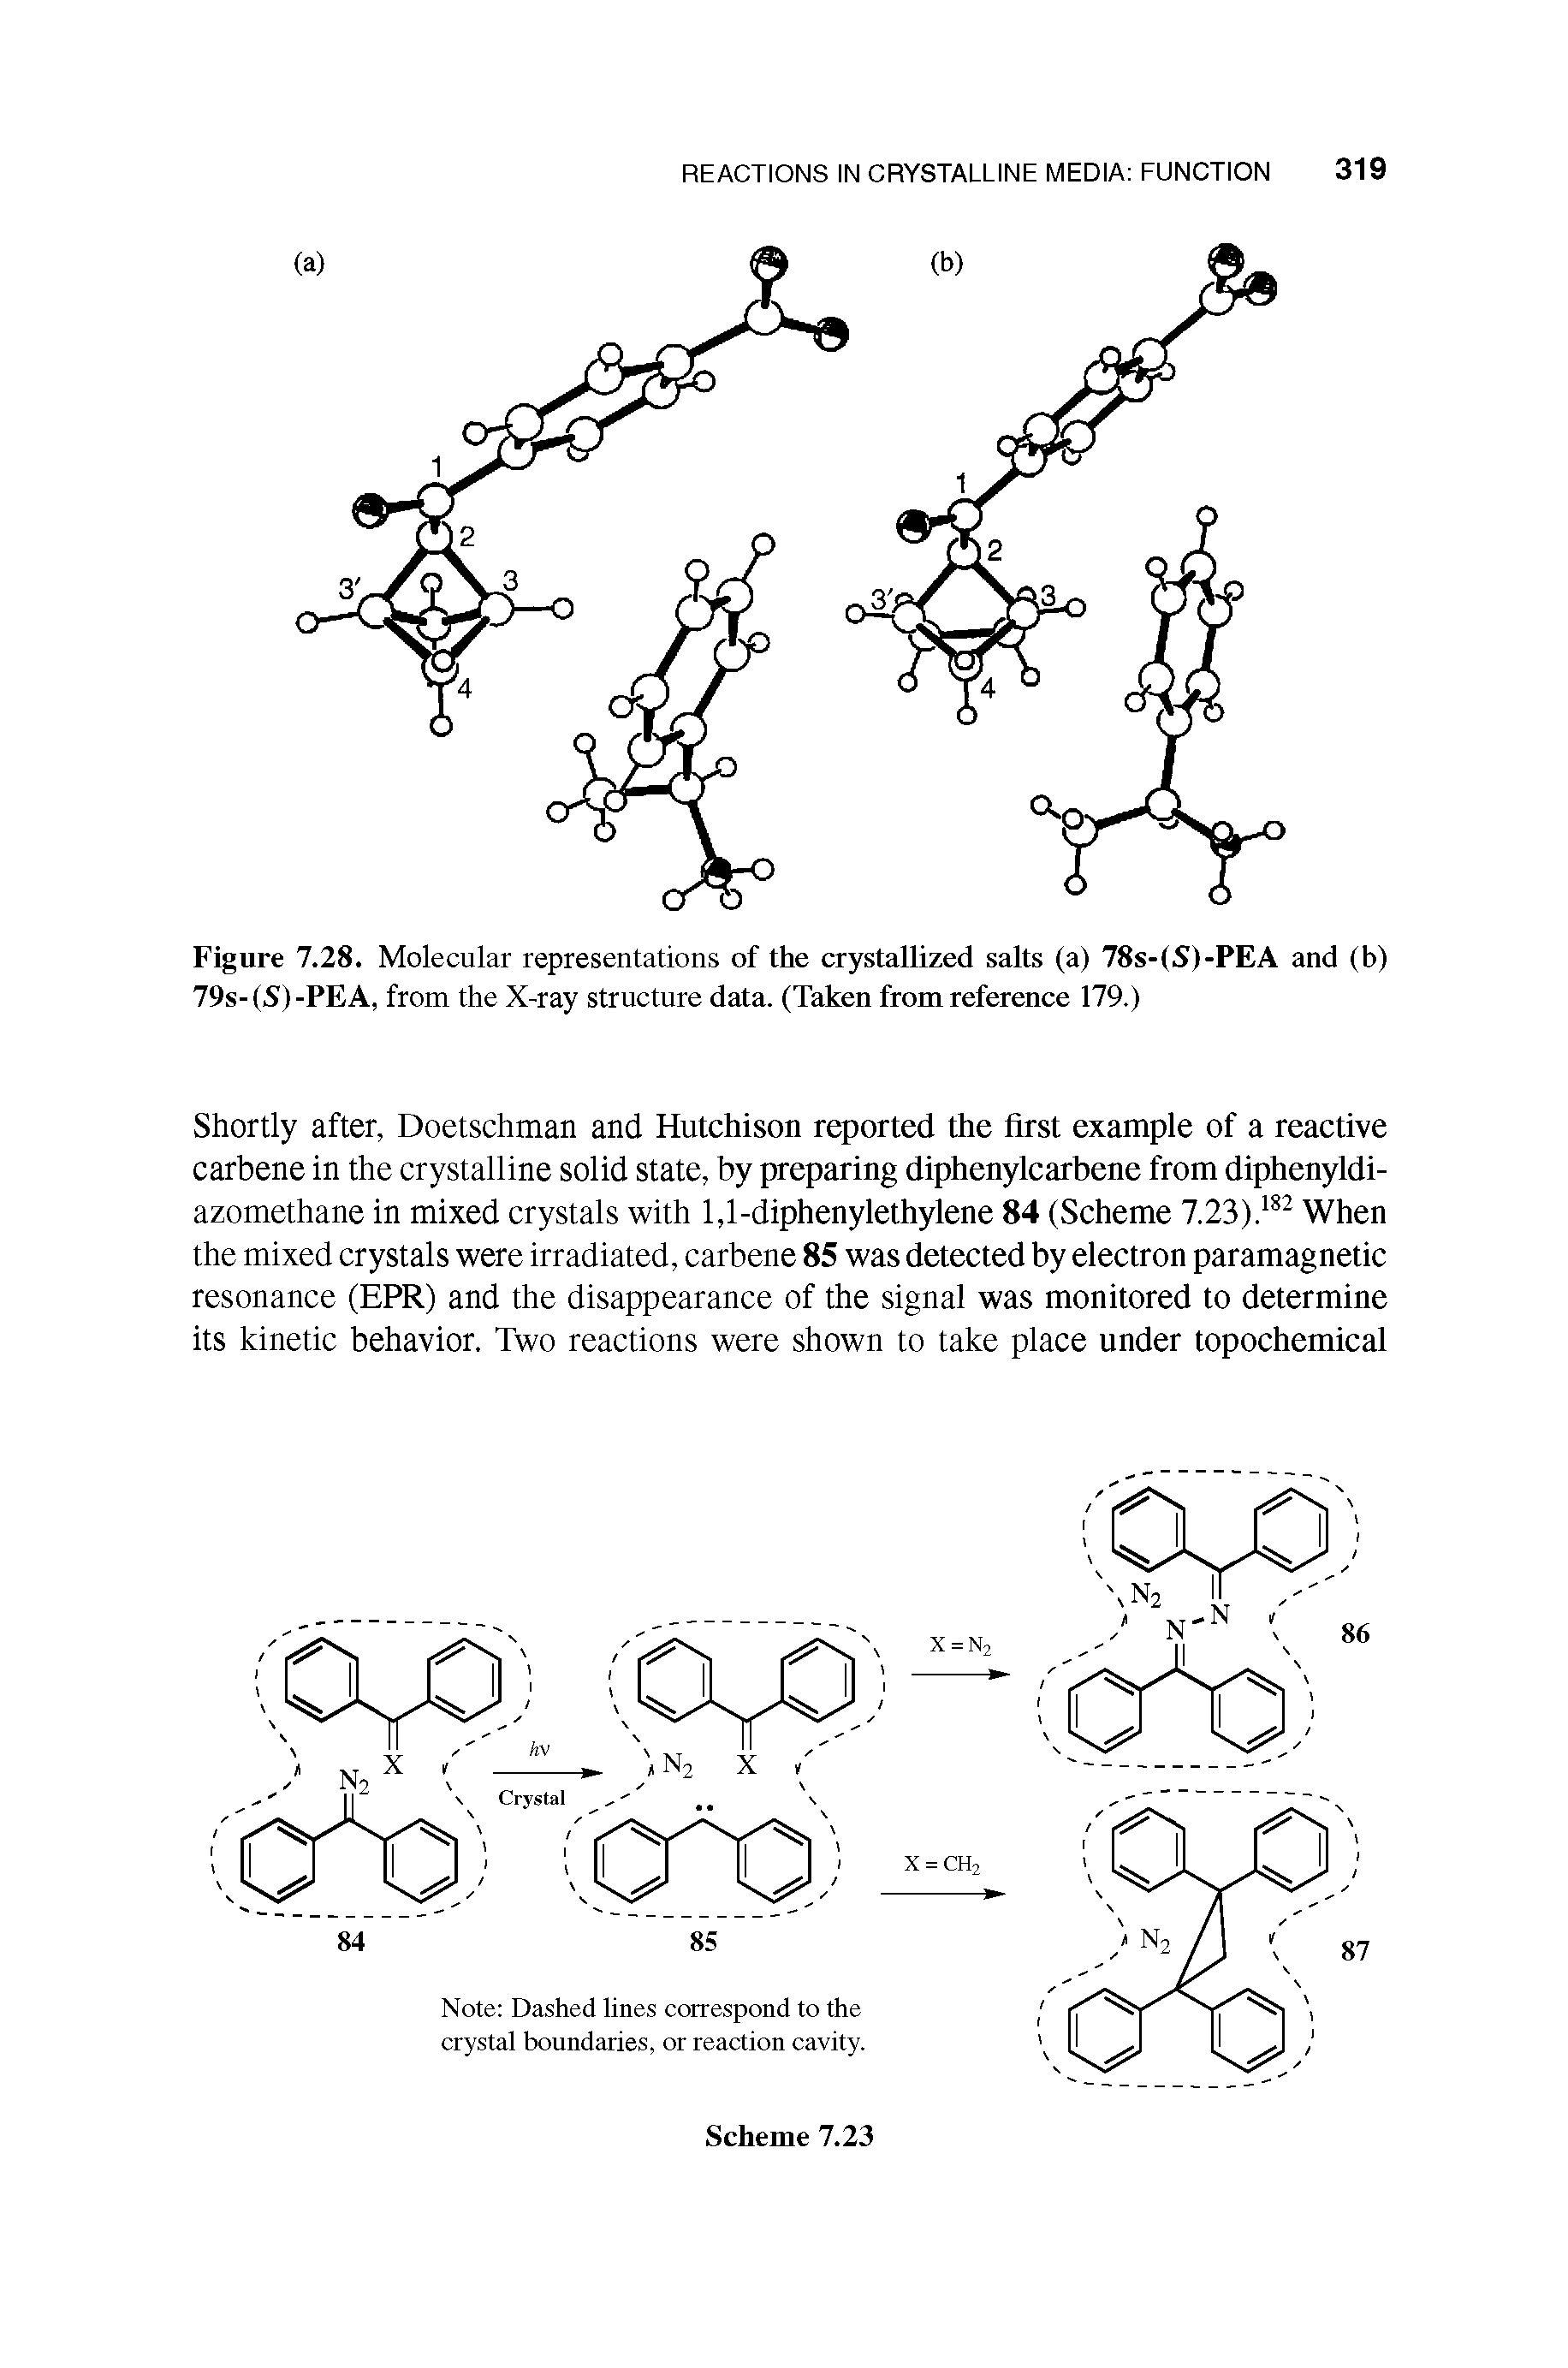 Figure 7.28. Molecular representations of the crystallized salts (a) 78s-(S)-PEA and (b) 79s-(S)-PEA, from the X-ray structure data. (Taken from reference 179.)...